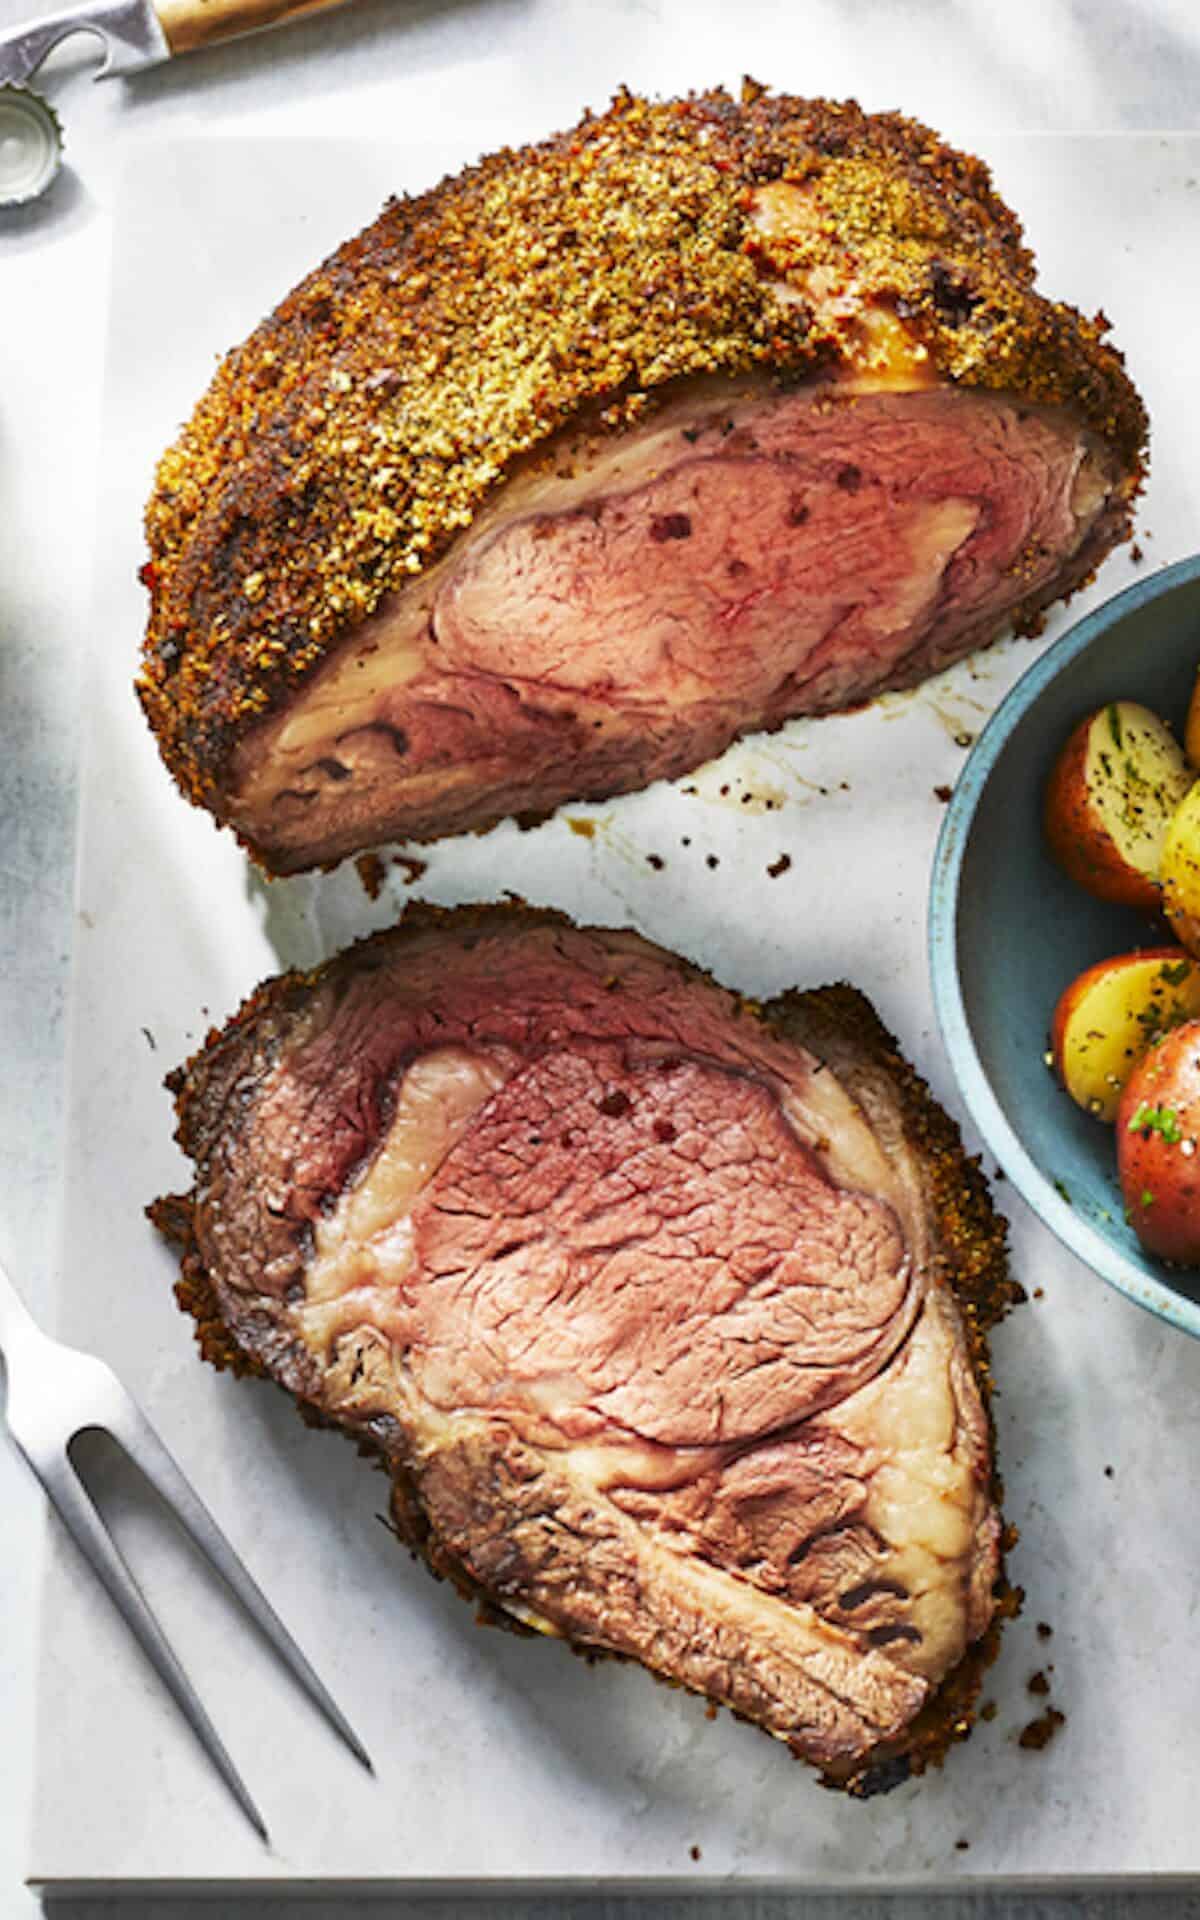  Impress your guests with this visually stunning and mouthwatering savory prime rib roast.